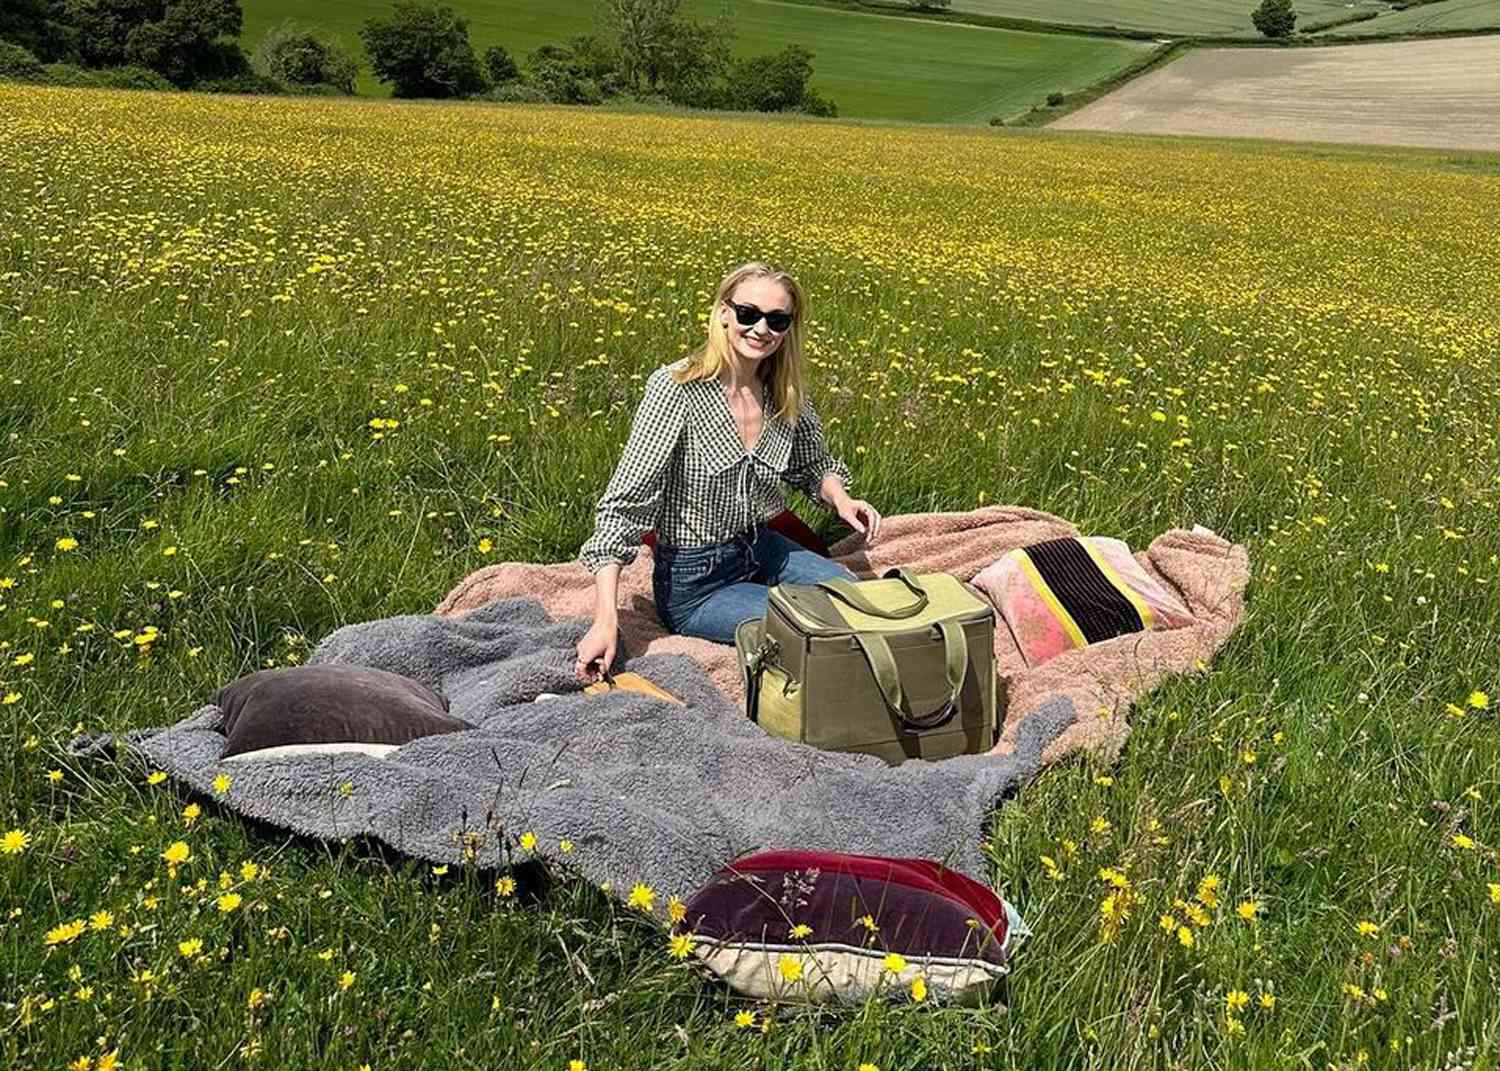 Sophie Turner Enjoys Romantic Picnic Date with Peregrine Pearson: 'Sun, Sex and Suspicious Parents'